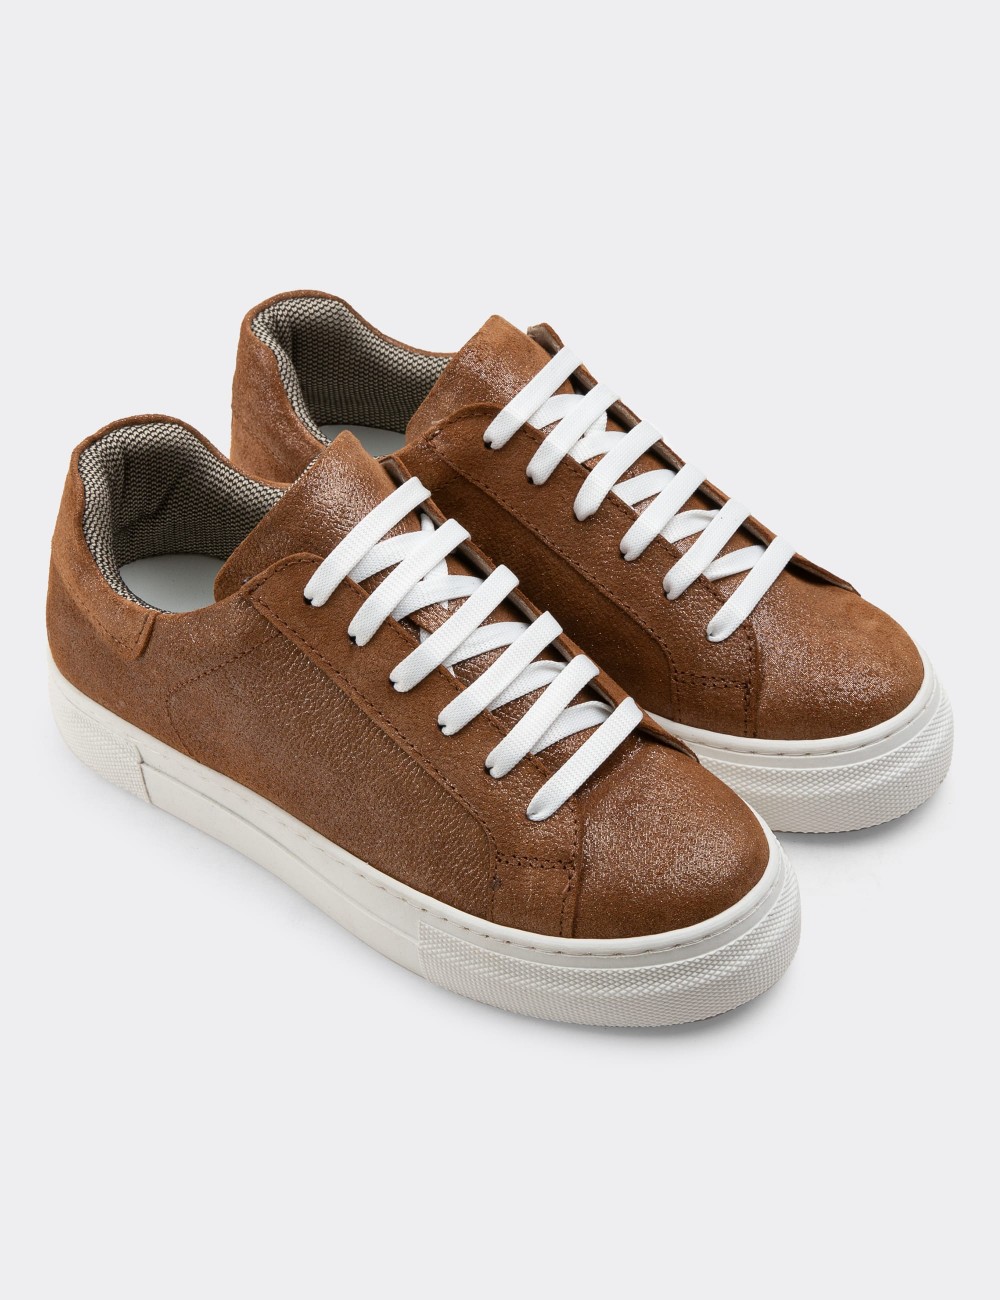 Tan Suede Leather Sneakers - Z1681ZTBAC03